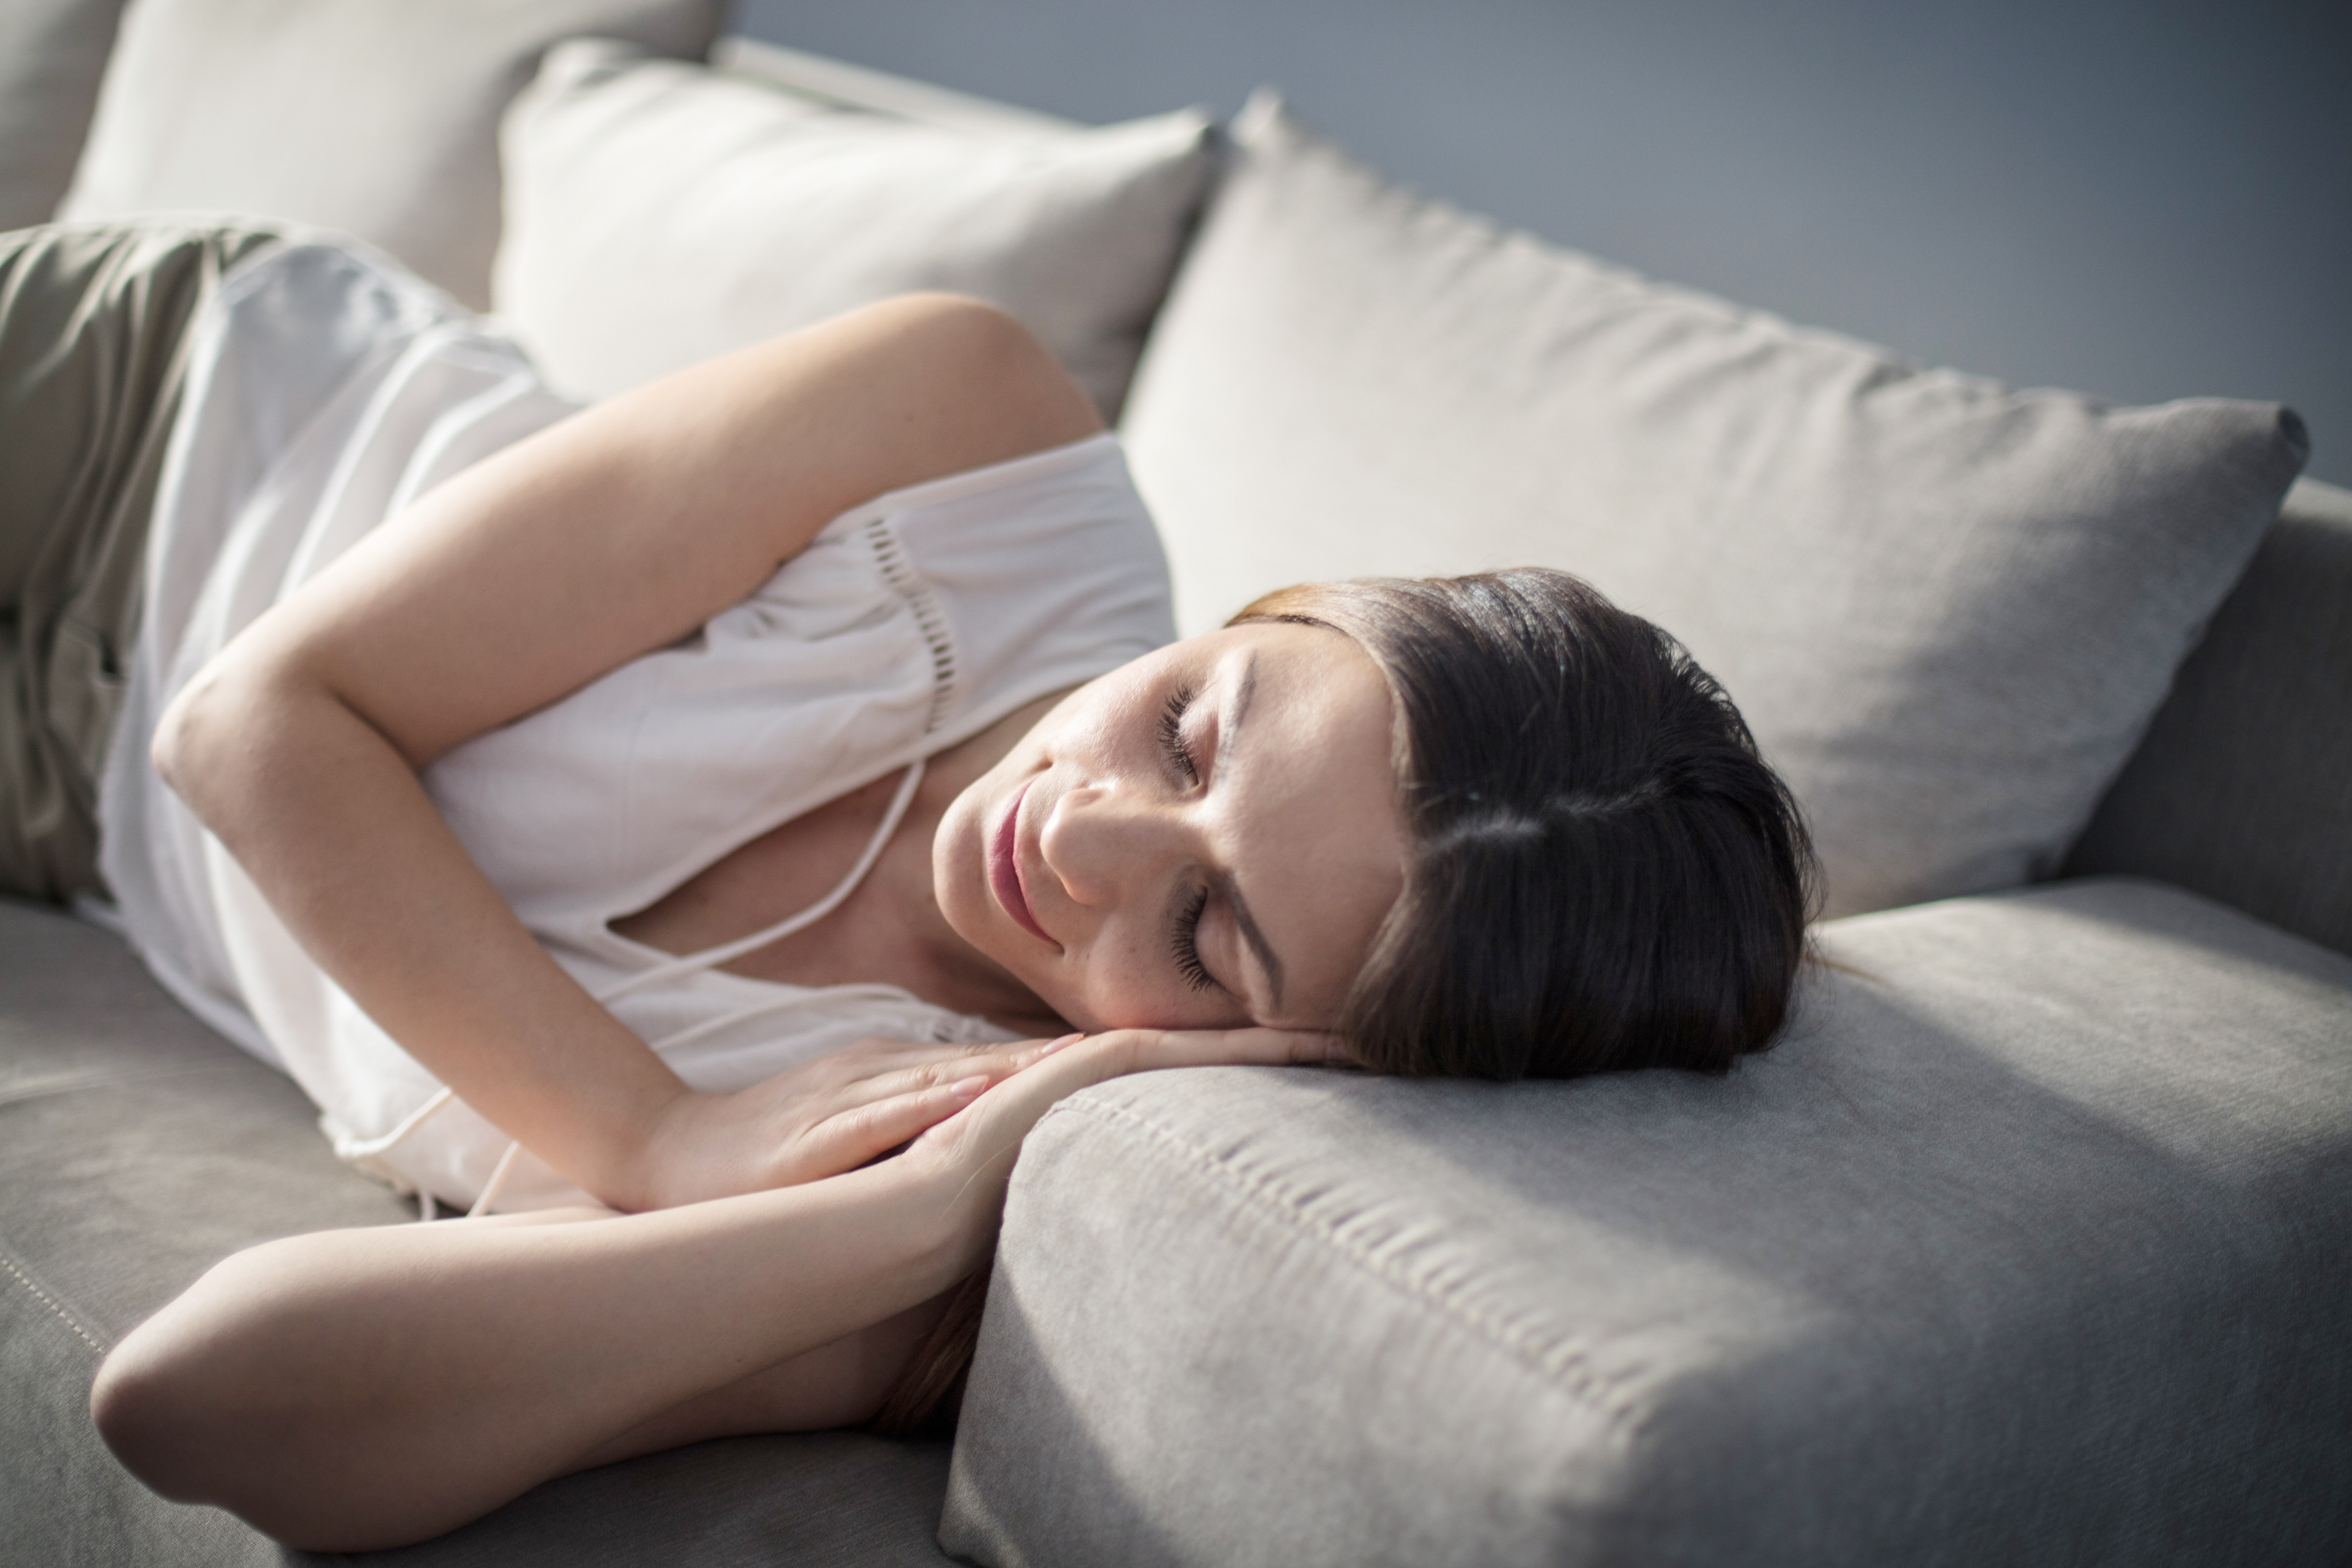 Taking a nap right after drinking coffee sounds counter-intuitive but makes sense, experts say. Photo: Shutterstock